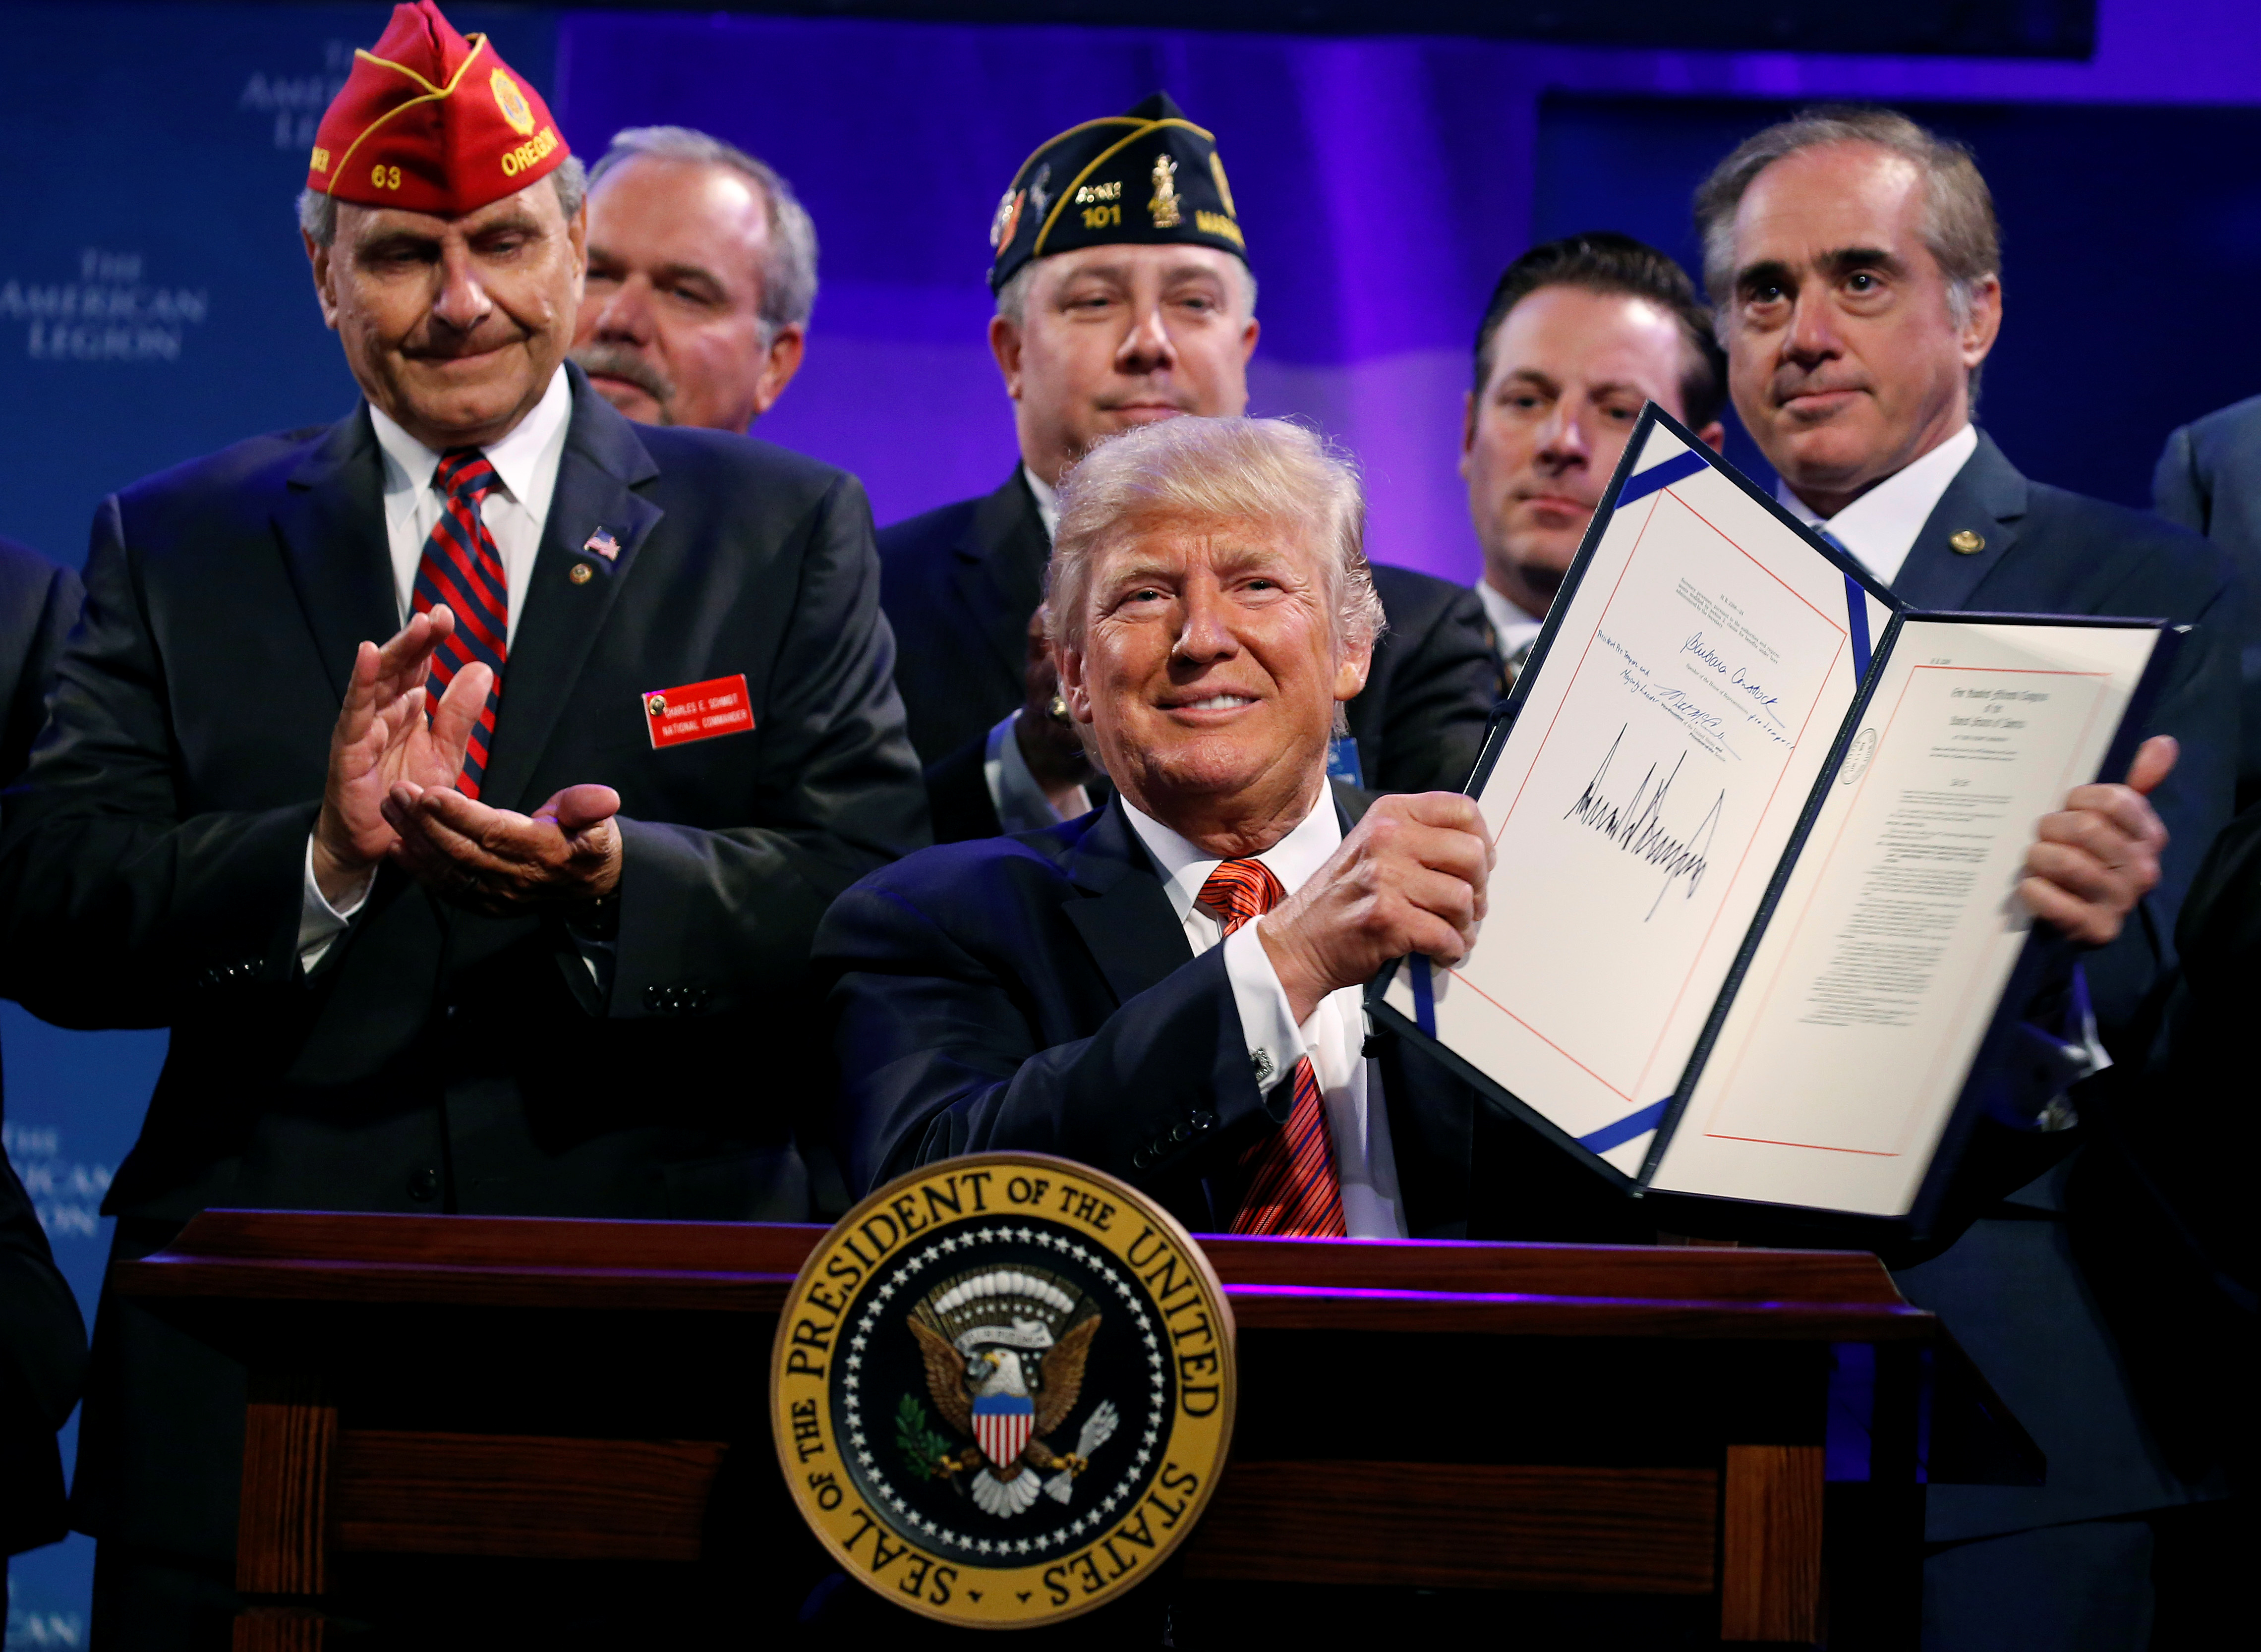 President Donald Trump holds up the Veterans Appeals Improvement and Modernization Act after signing it during the American Legion National Convention in Reno, Nevada on Aug. 23, 2017. (Joshua Roberts—REUTERS)